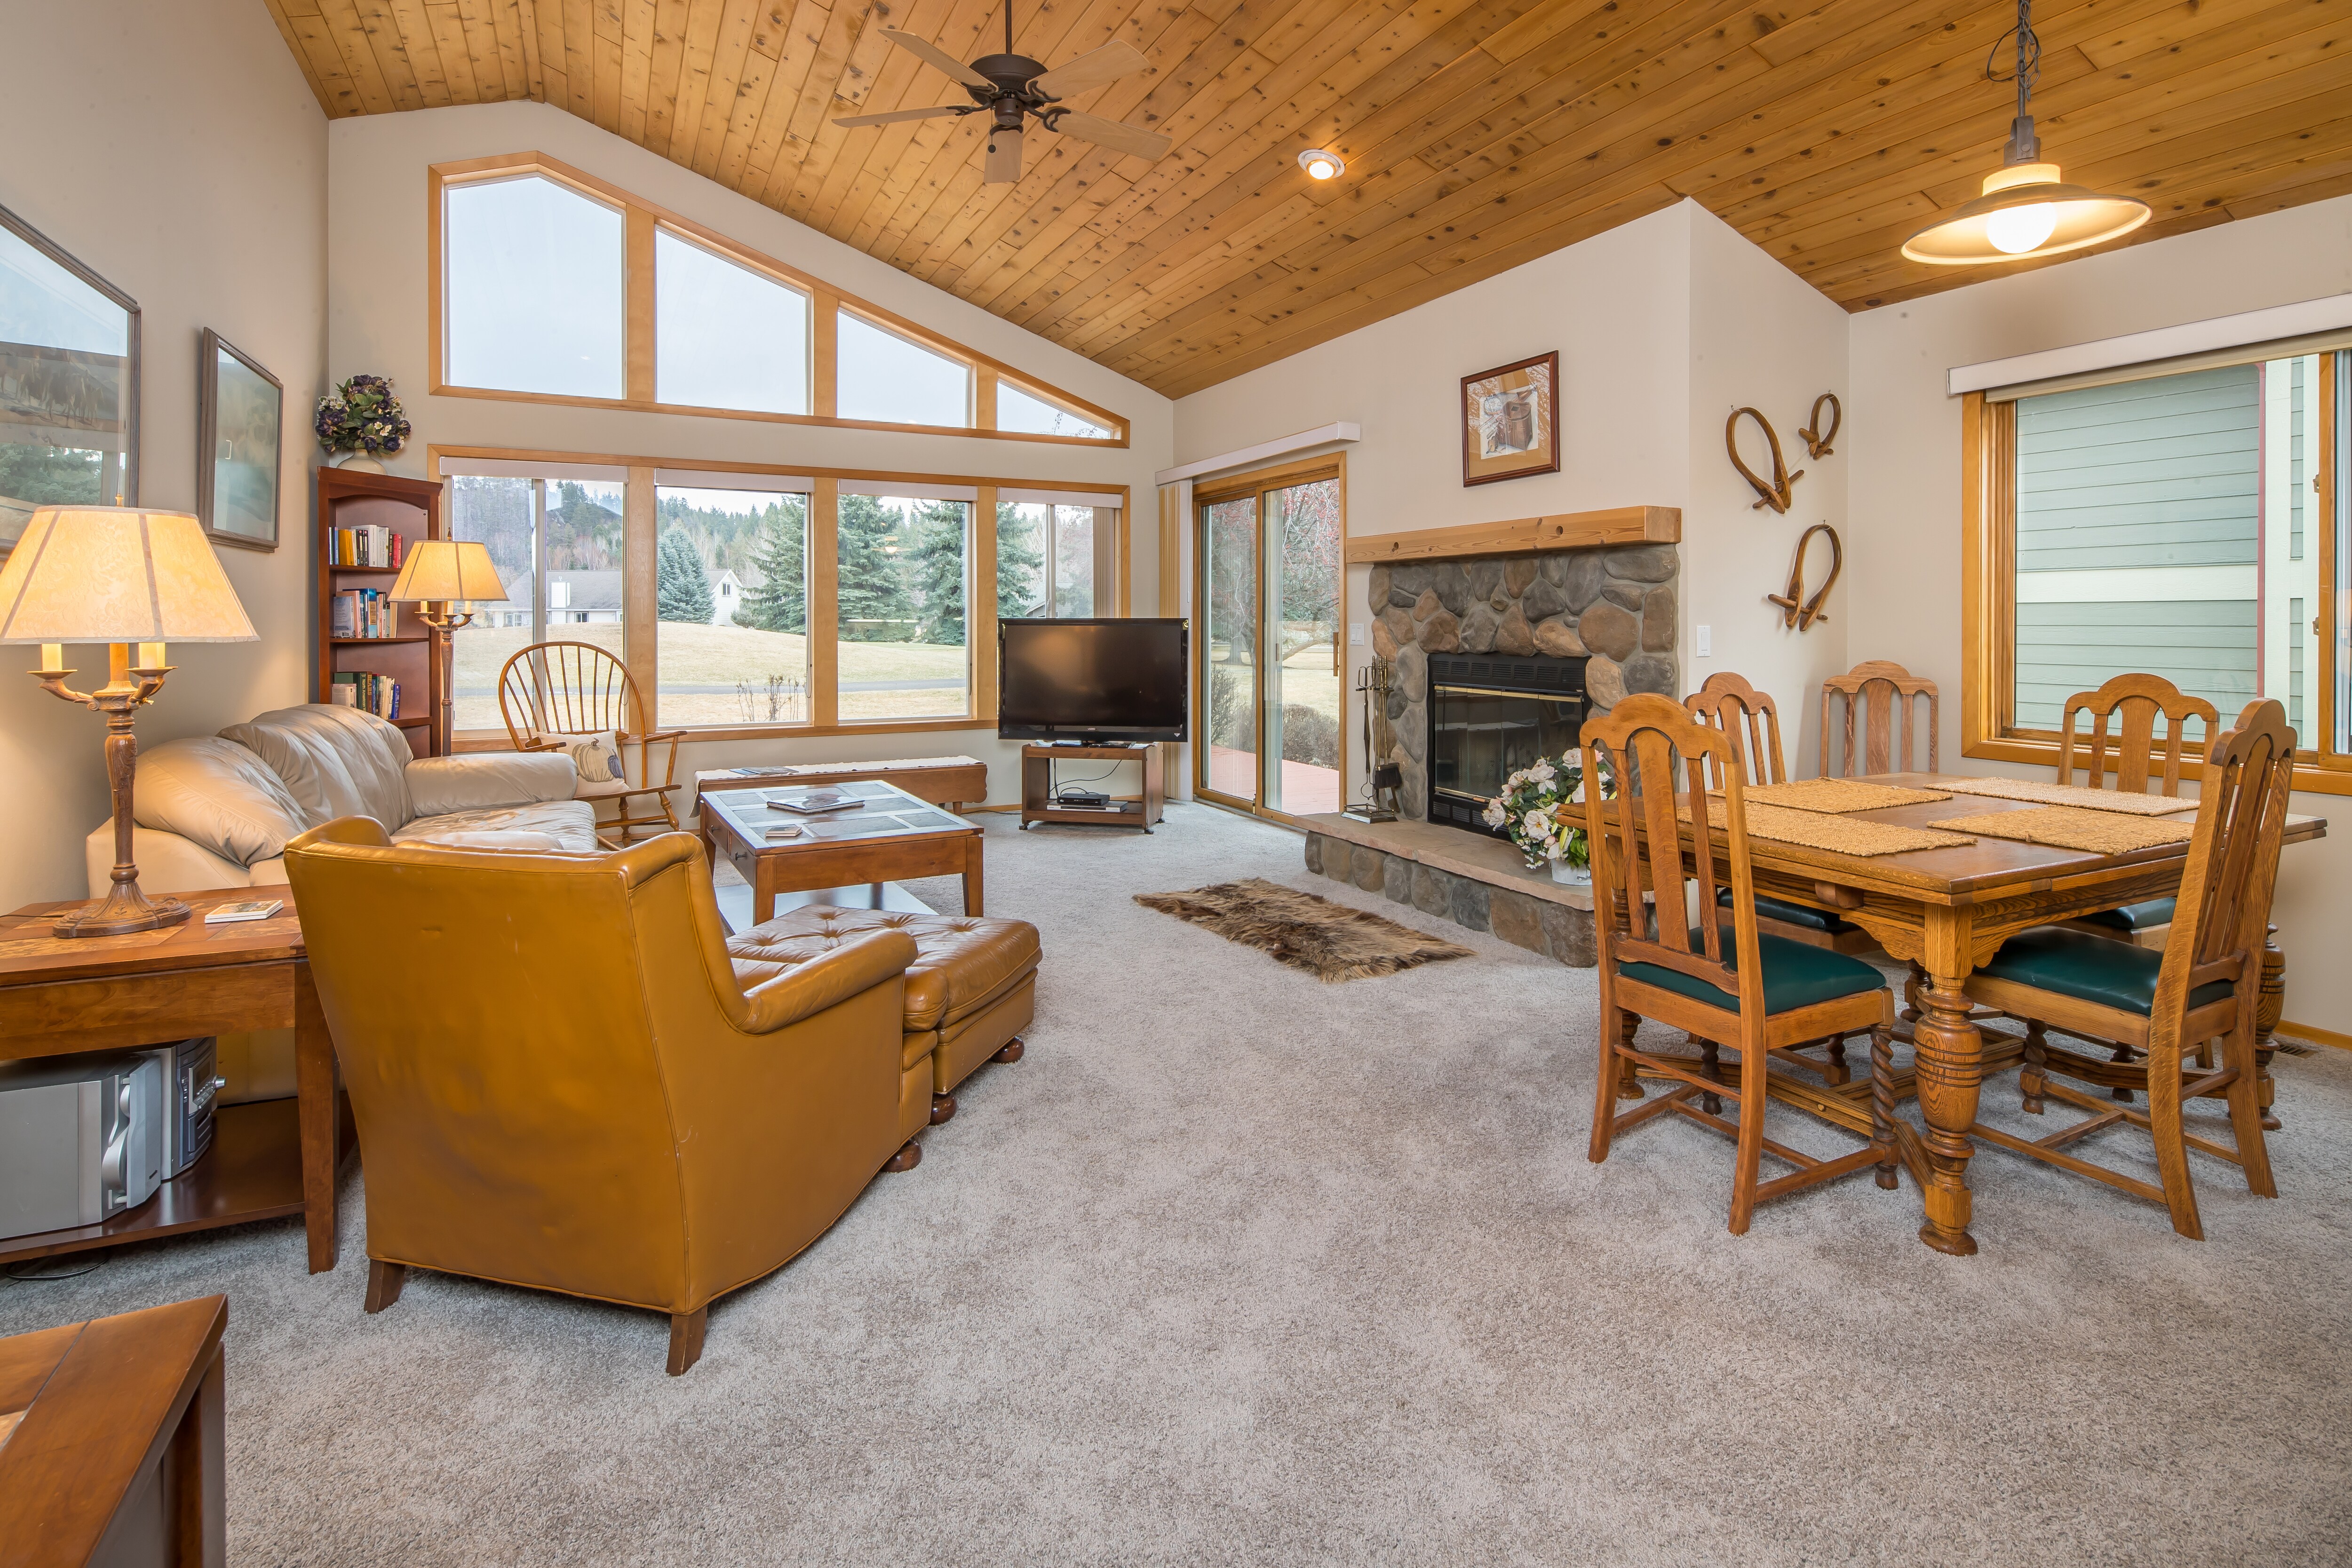 Cozy up by the fireplace and enjoy the views | Main Level